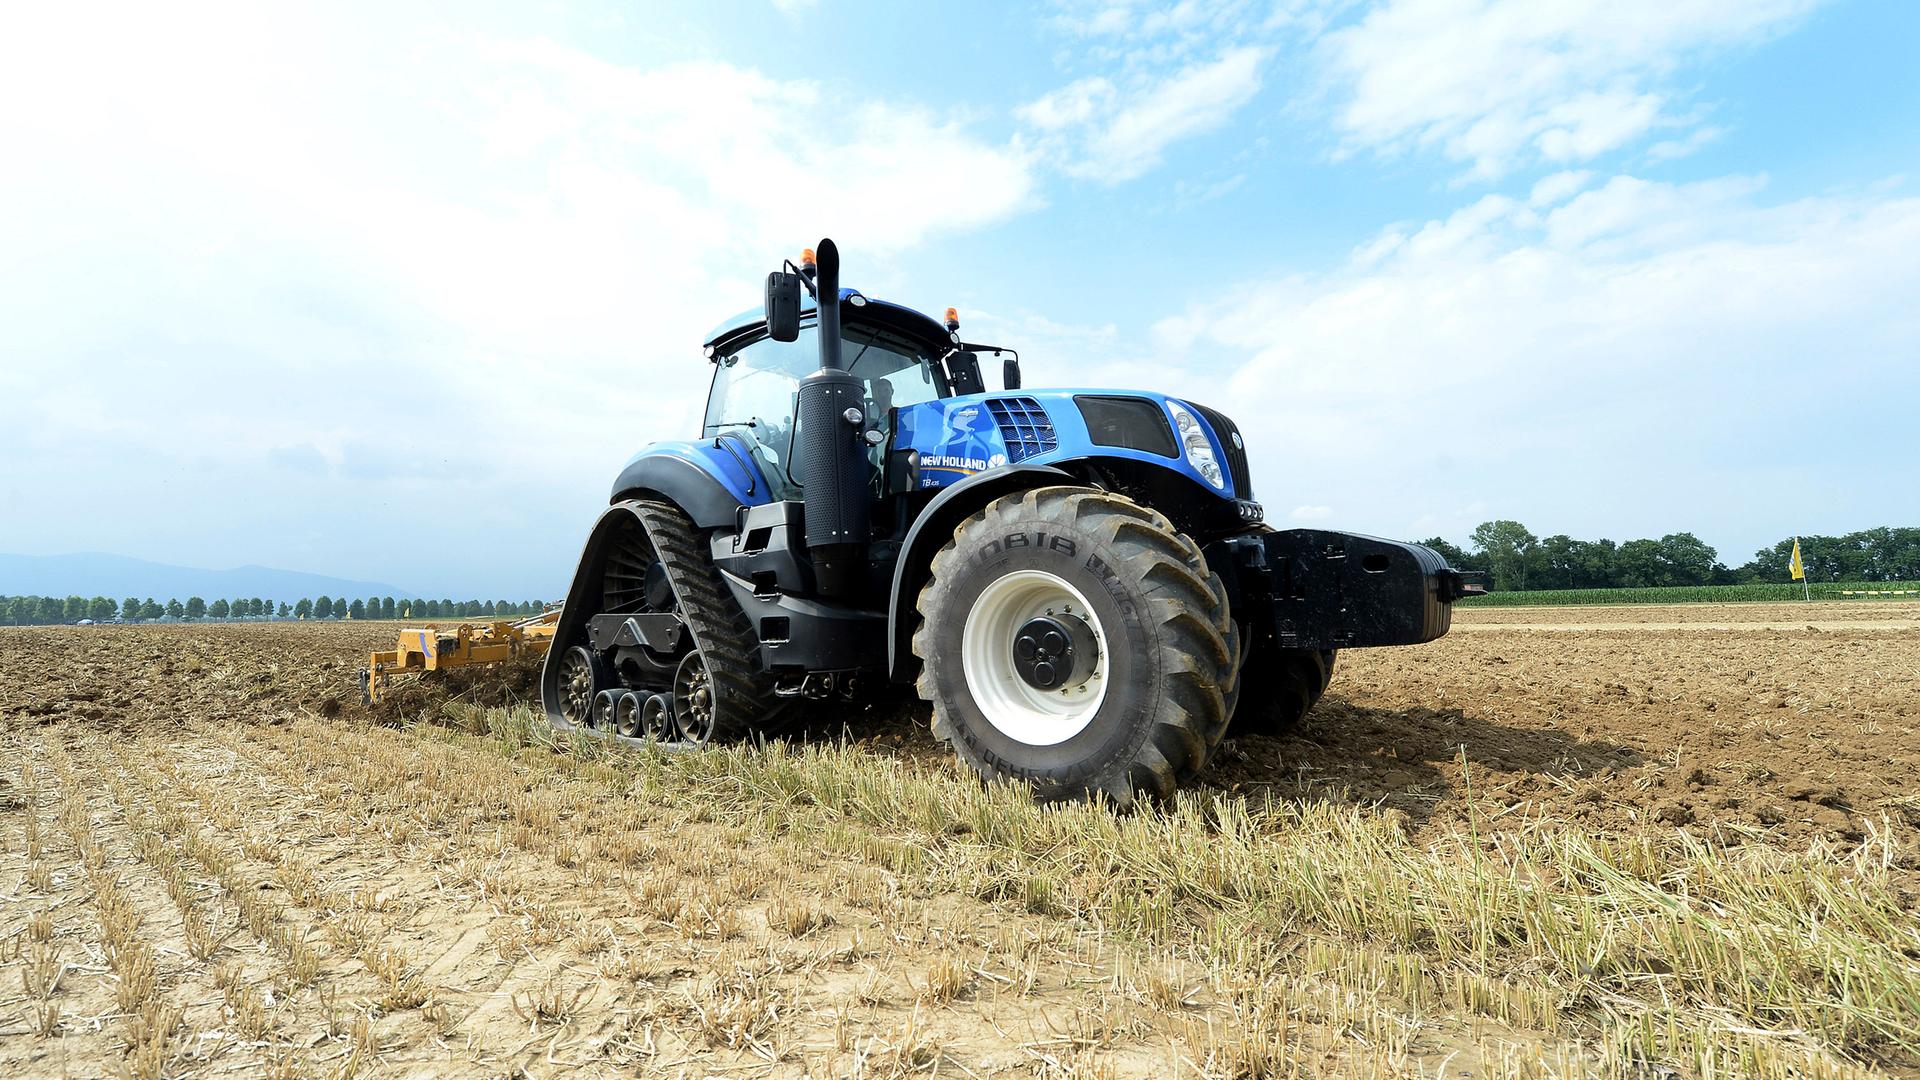 In this photo taken on June 10, 2015, a moment of the presentation and live demonstration to introduce the New Holland T6 Methane Tractor in Turin, Italy. The new technology is being developed to respond to the future needs of the agriculture industry, with the goal of making farms self-sufficient and sustainable. (AP Photo/Massimo Pinca)